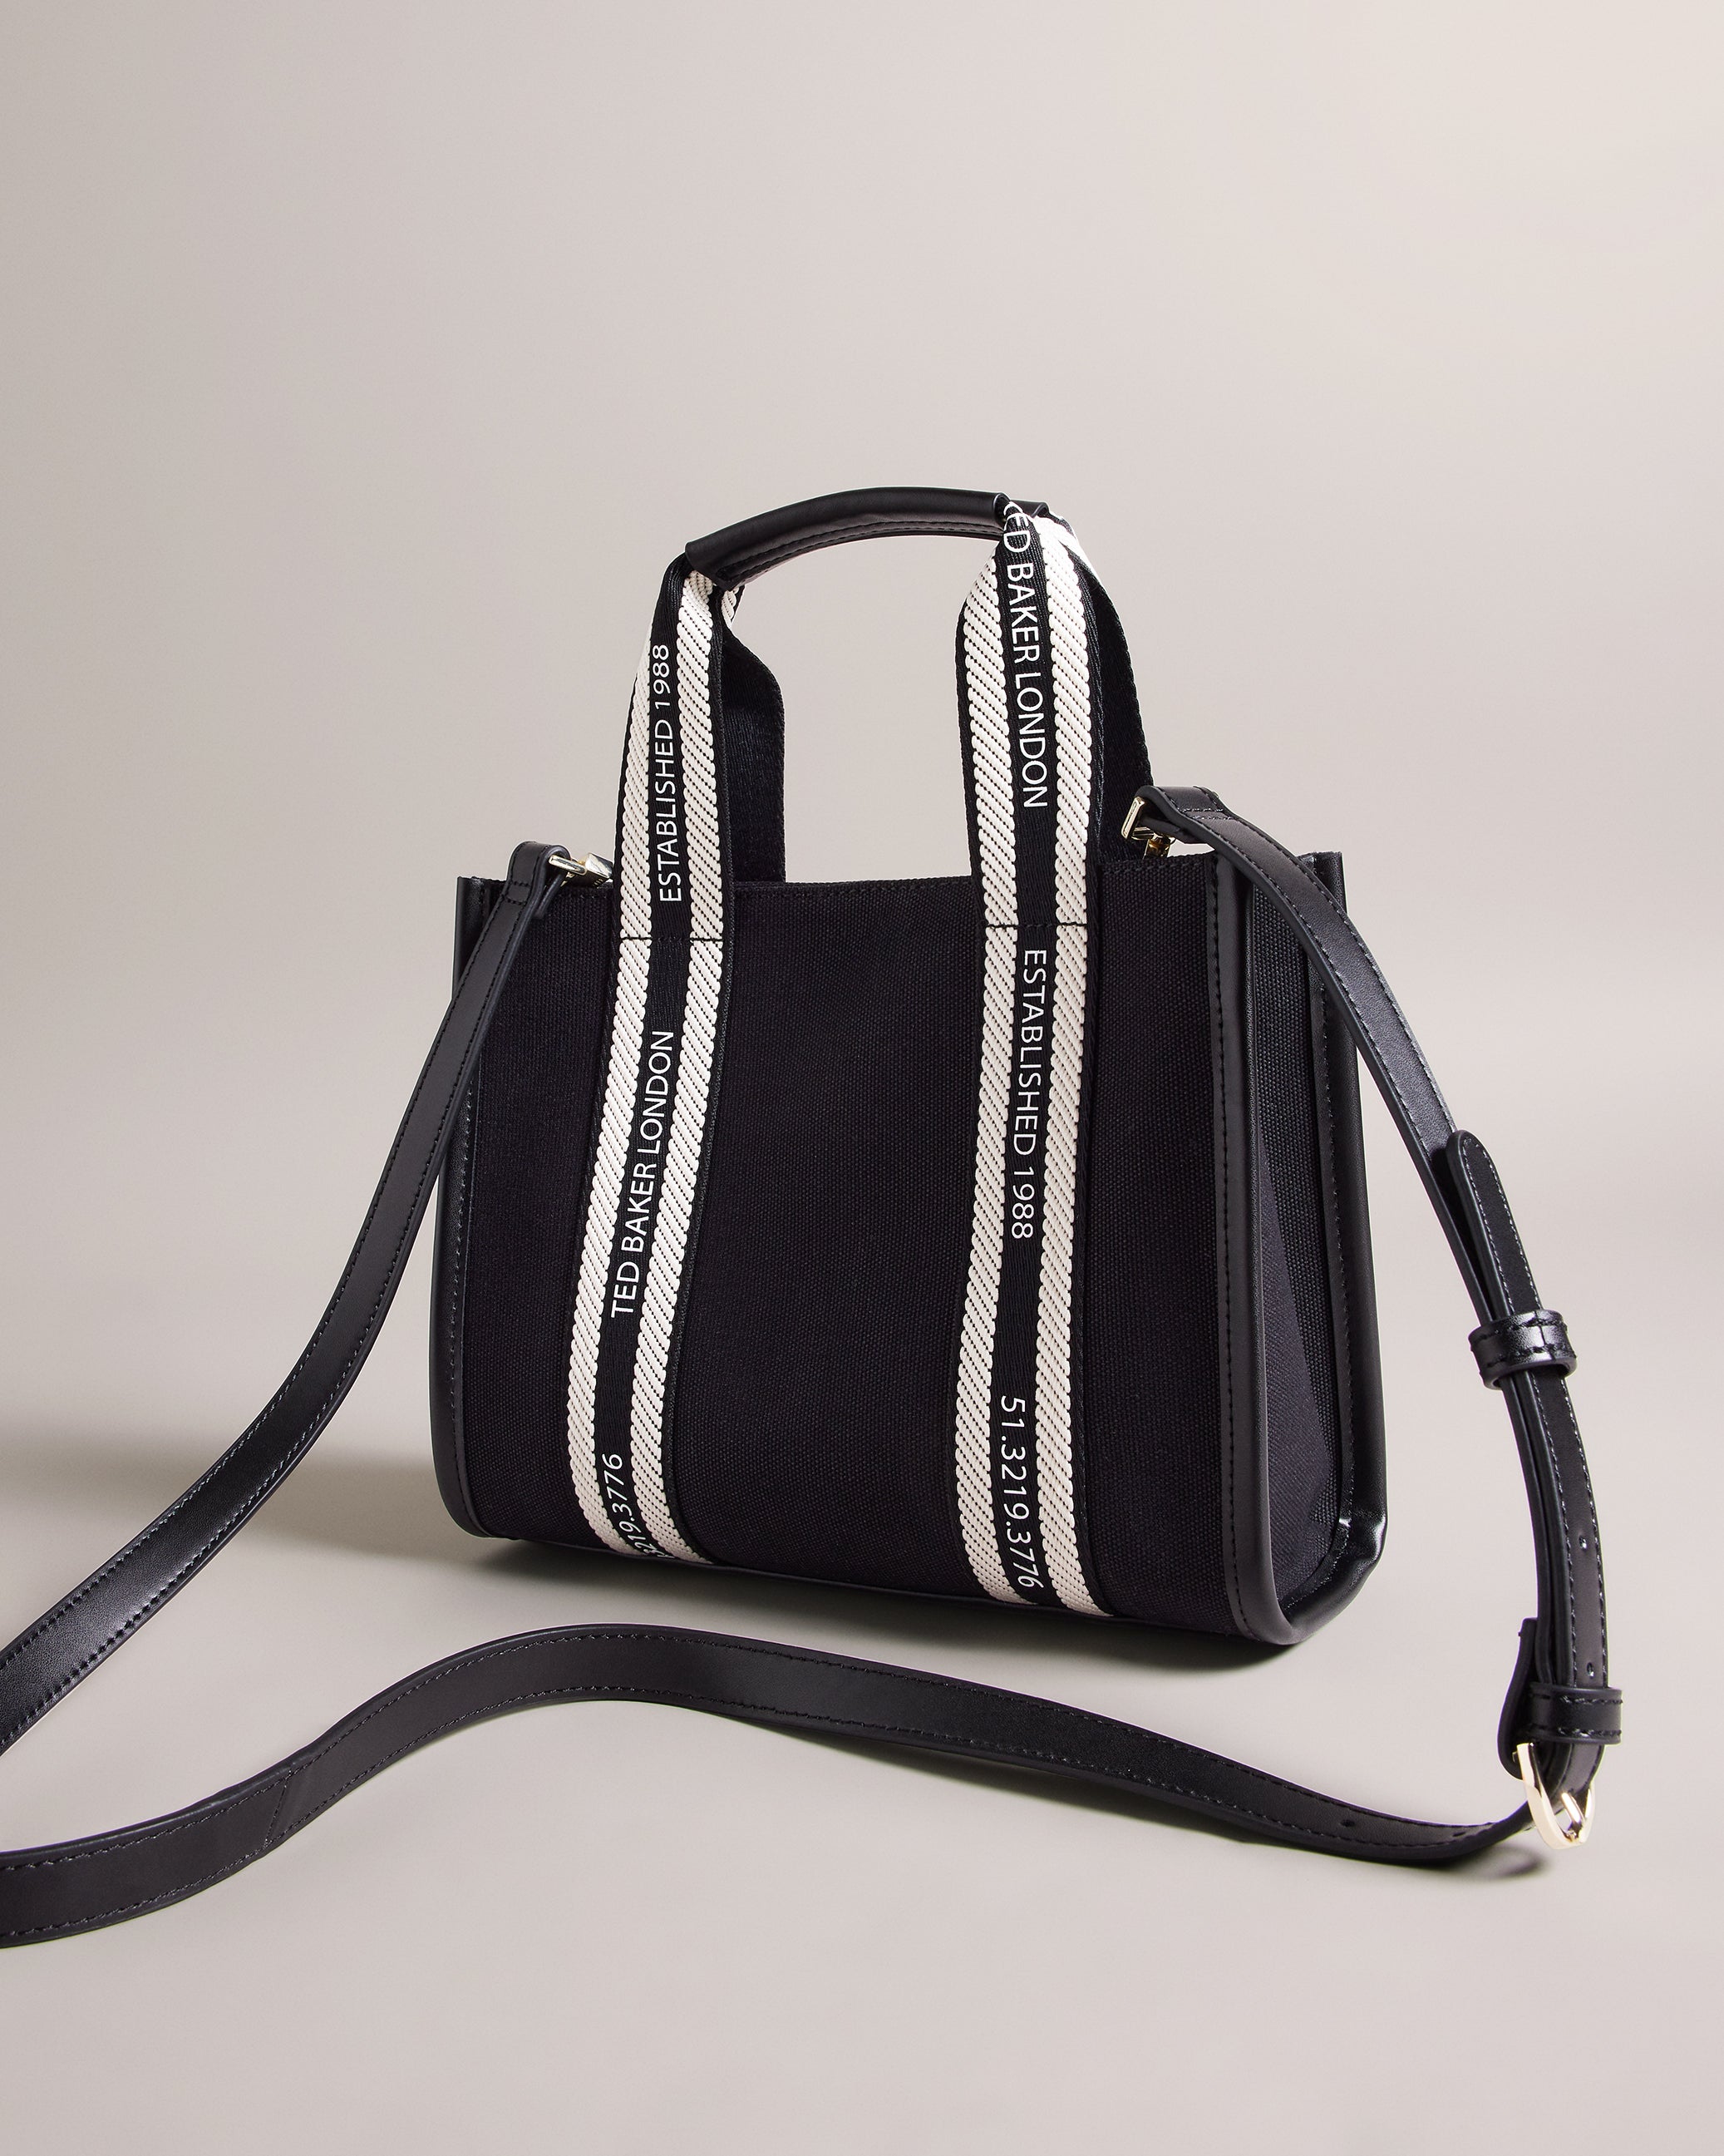 TED BAKER Darceyy Leather Cross Body Bag in Black | Endource